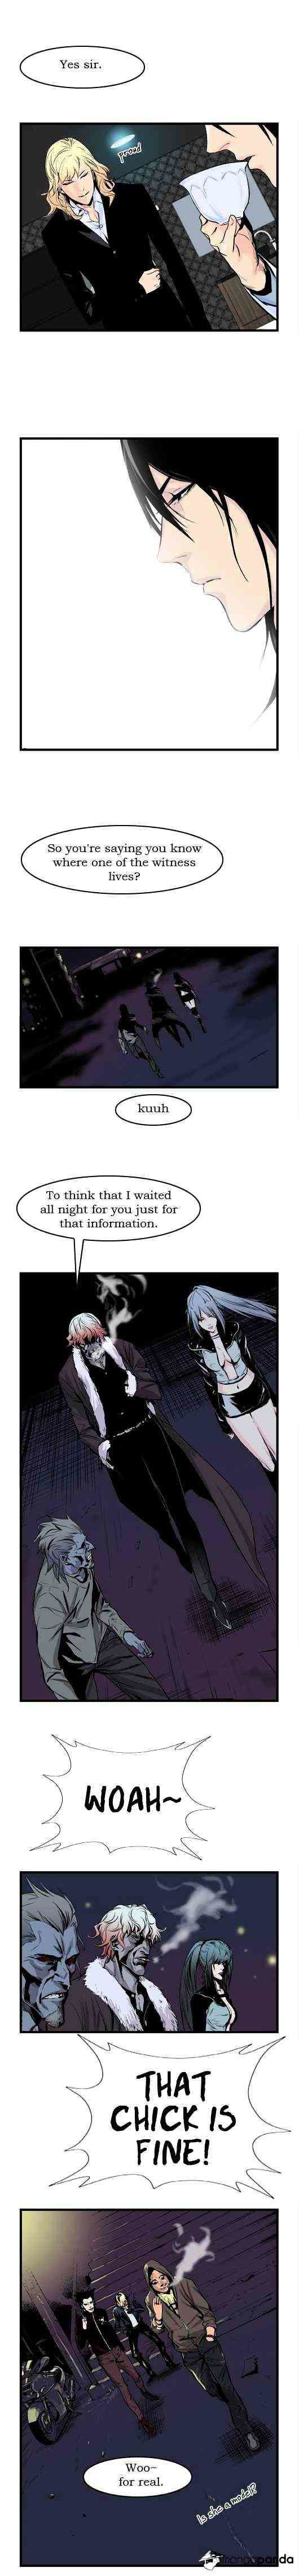 Noblesse Chapter 42 page 2